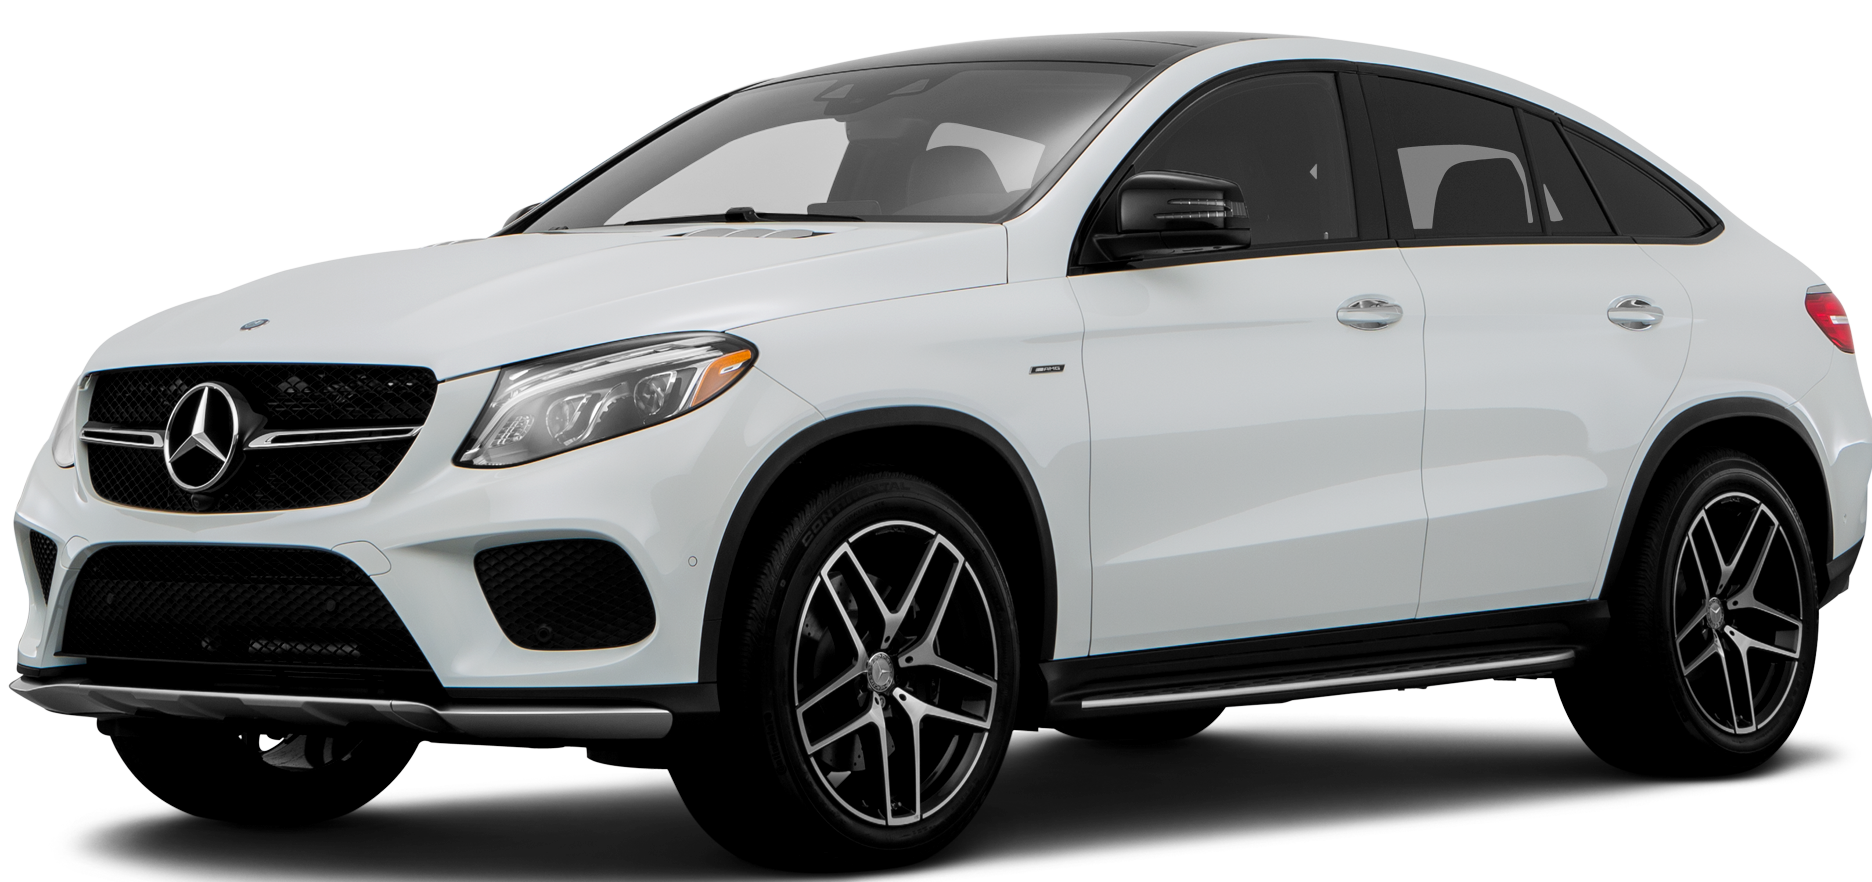 2016-Mercedes-Benz-GLE-Coupe-front_10773_032_2400x1800_149